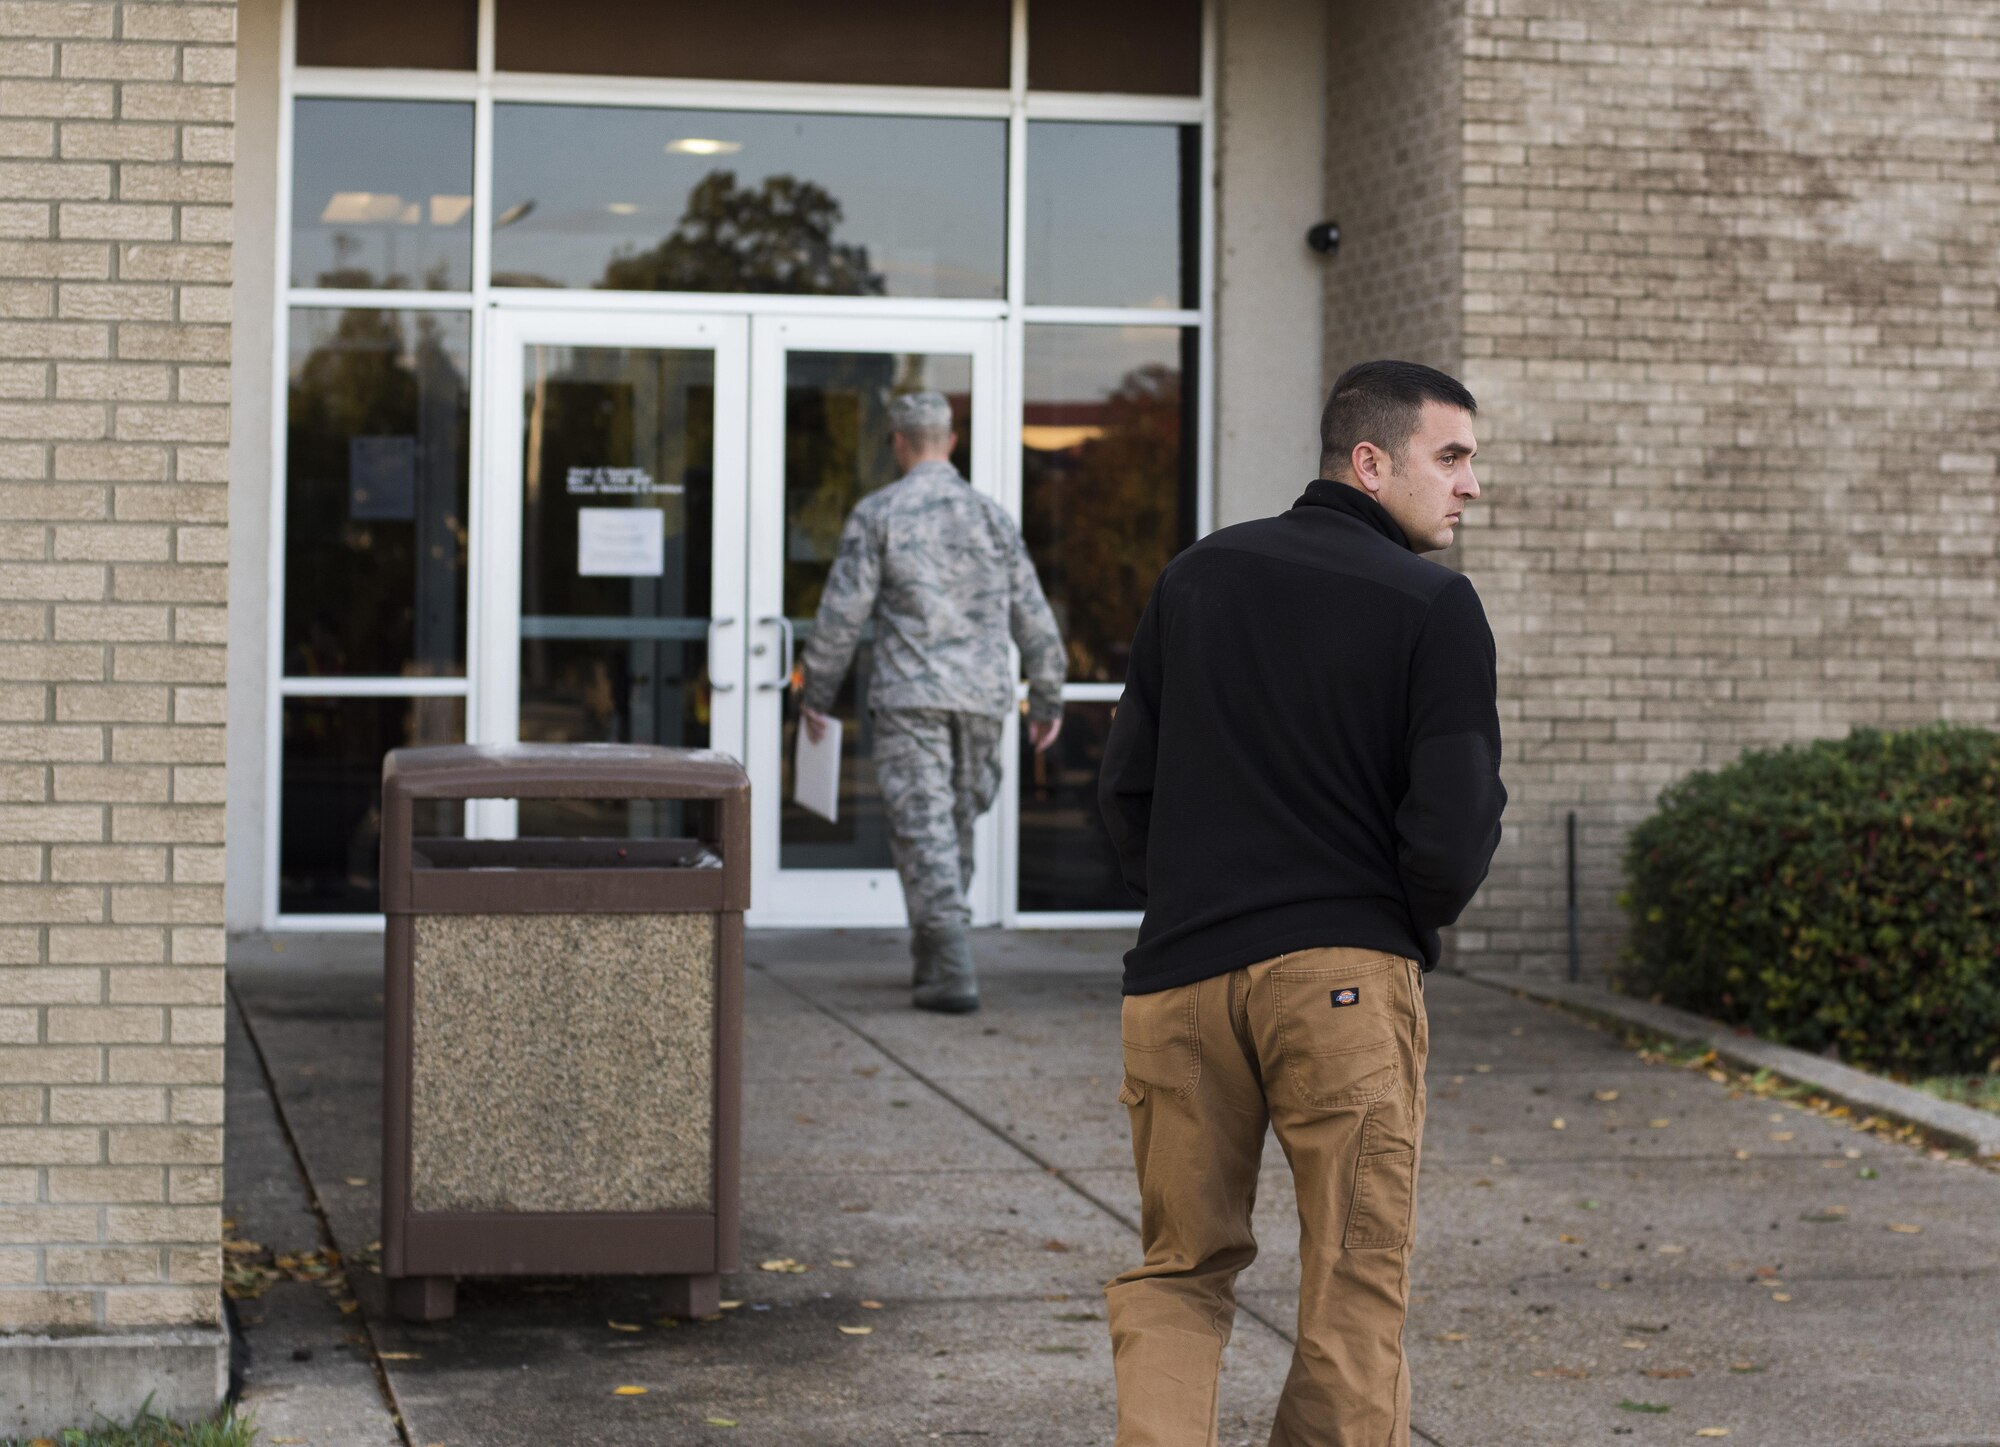 Master Sgt. Jeremy Utphall, 2nd Bomb Wing Inspector General exercise division superintendent, looks over his shoulder as he heads into the medical building during an active shooter exercise at Barksdale Air Force Base, La., Nov. 29, 2016. Like an actual active shooter incident, Airmen weren’t given a warning. While some were caught off guard, others implemented their training and avoided Utphall as he searched the medical building for potential victims. (U.S. Air Force photo/Senior Airman Damon Kasberg)